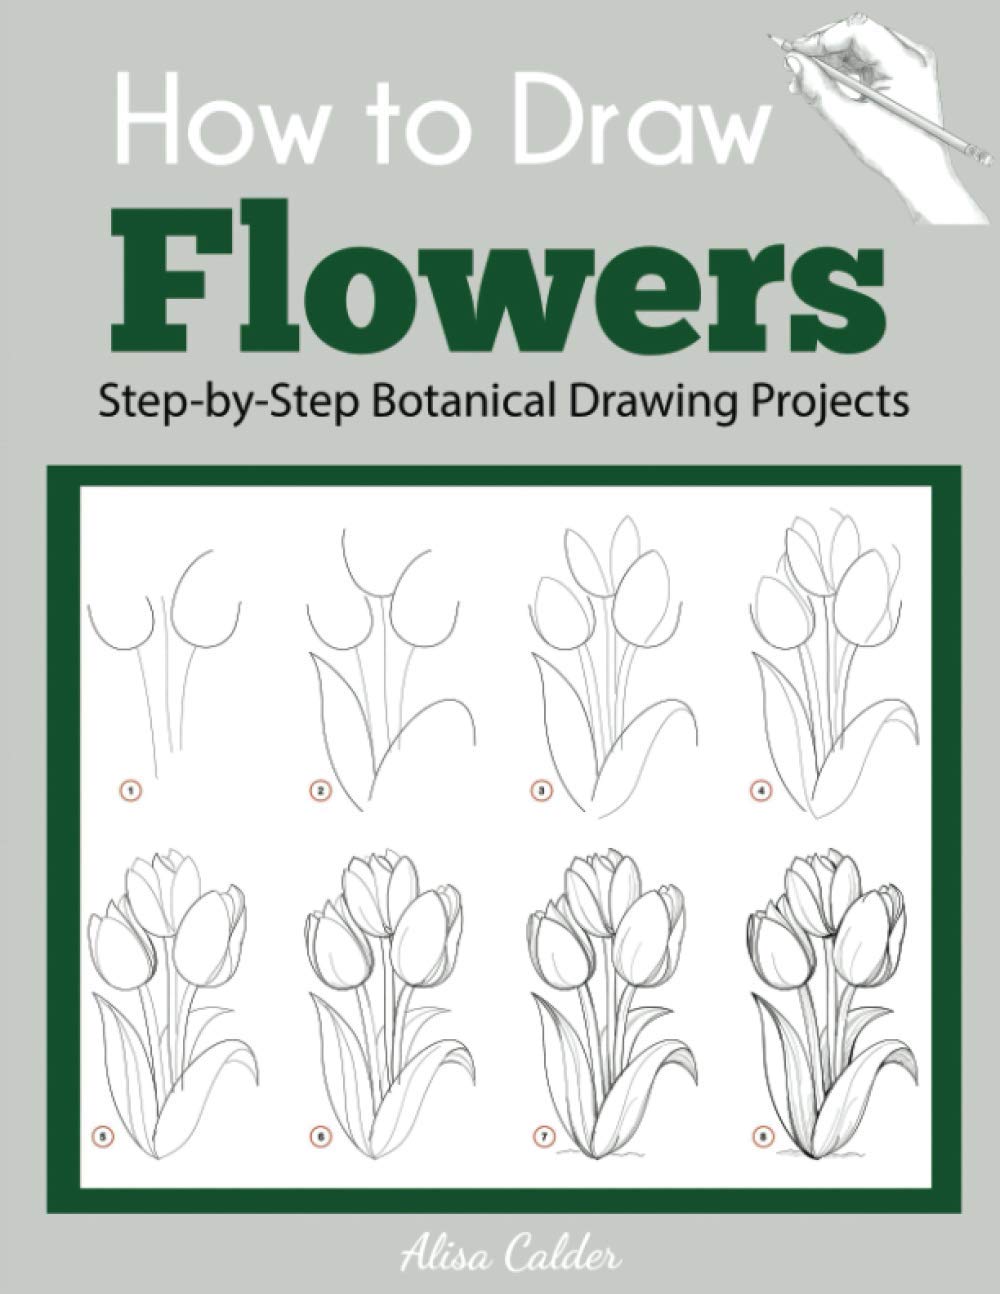 How to Draw Flowers - Step by Step Botanical Drawing Projects